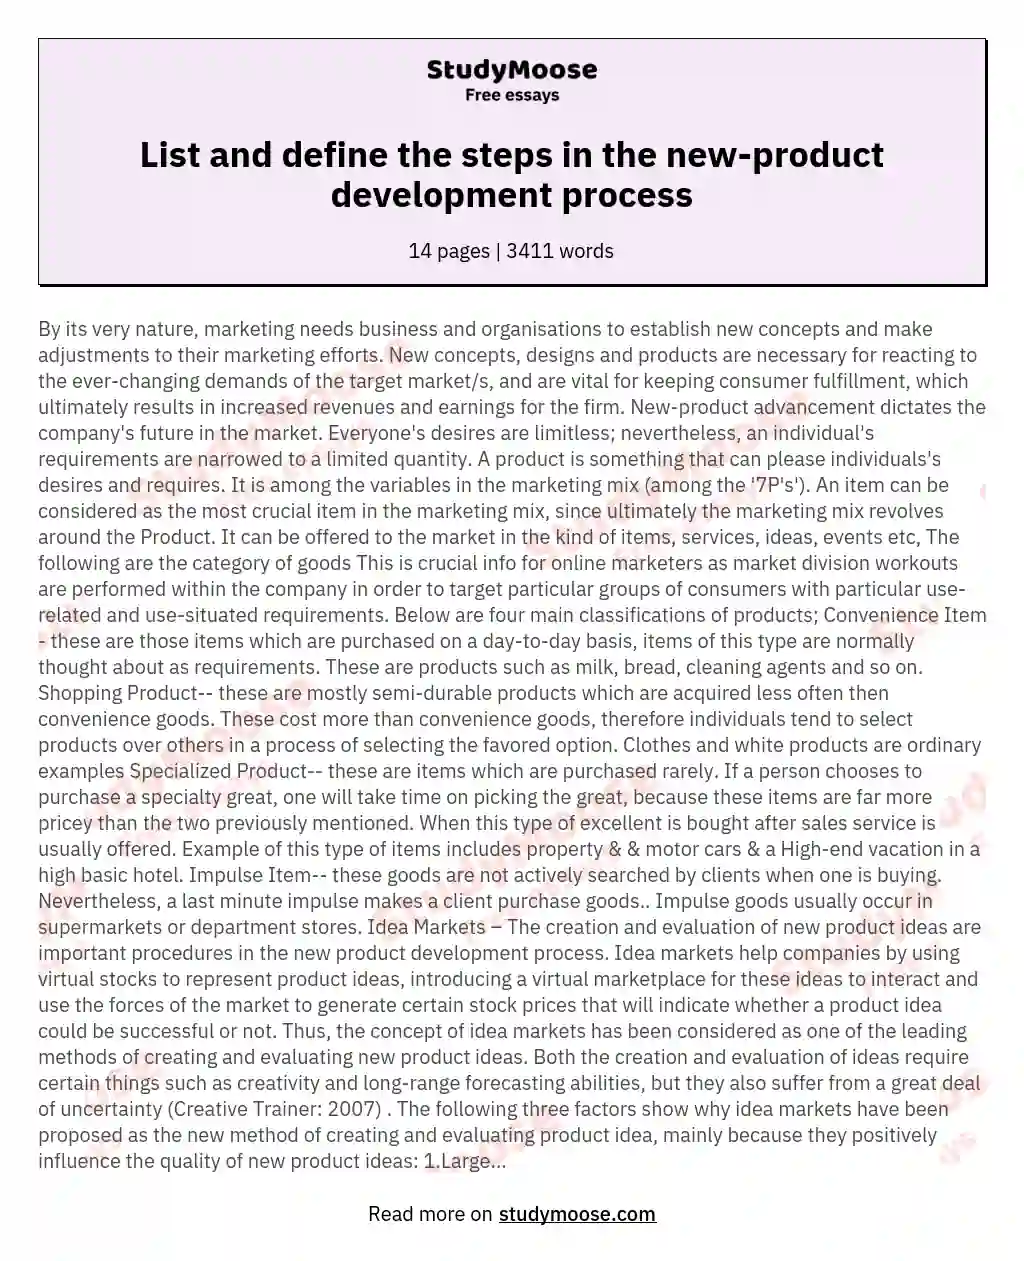 List and define the steps in the new-product development process